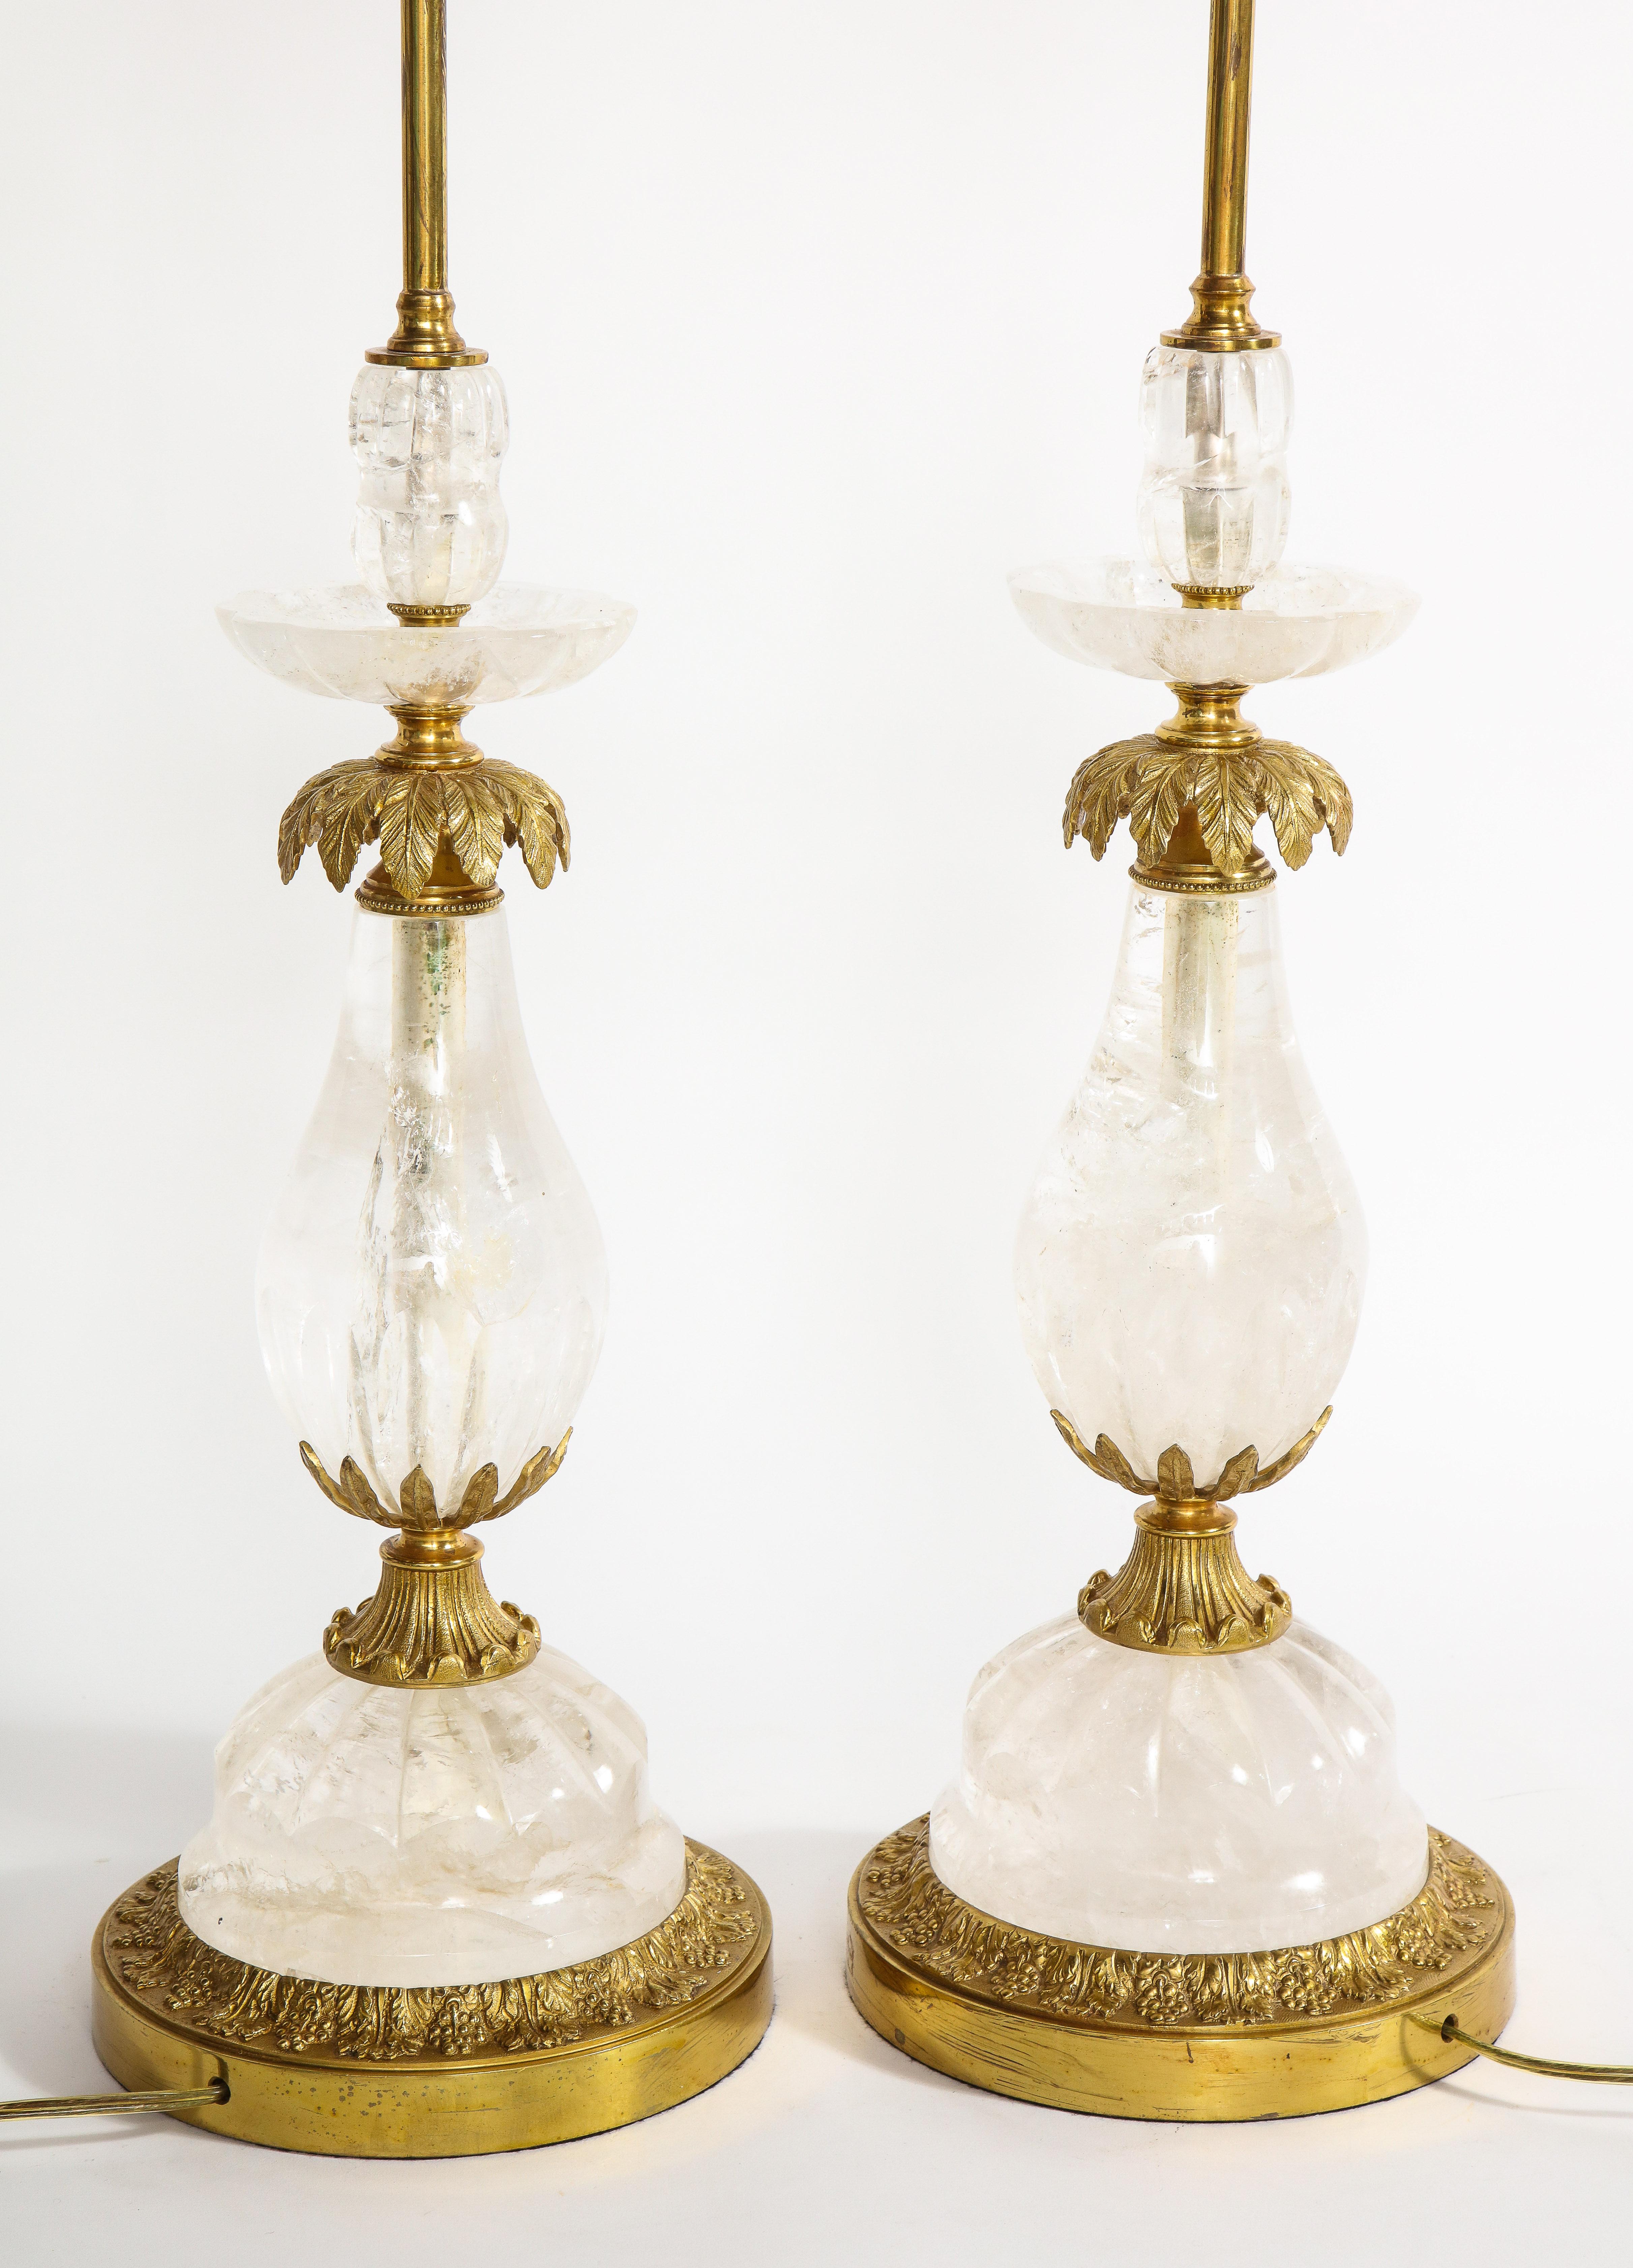 Pair of Art Deco Ormolu Mounted Palm Tree Form Rock Crystal Quartz Lamps For Sale 6